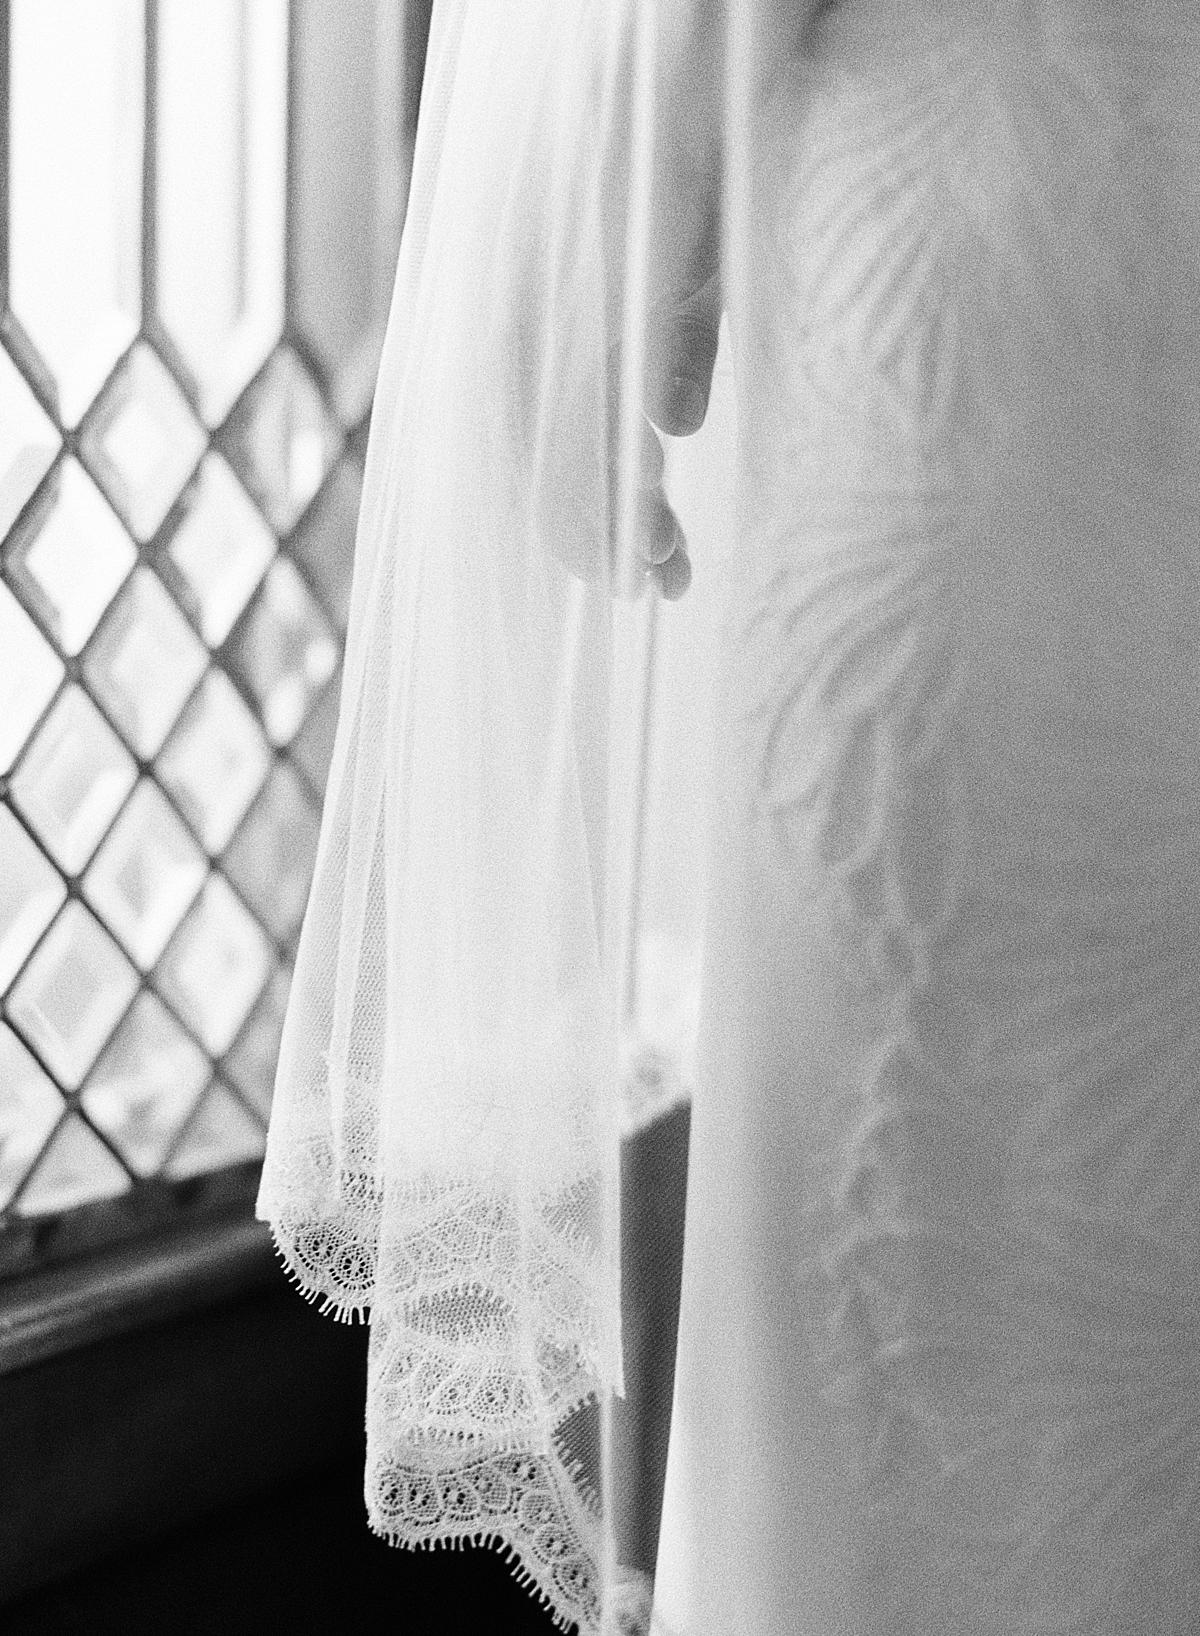 A bride gazes out the window with a lace veil covering her fingers, photographed on Ilford Delta 3200 black and white film.